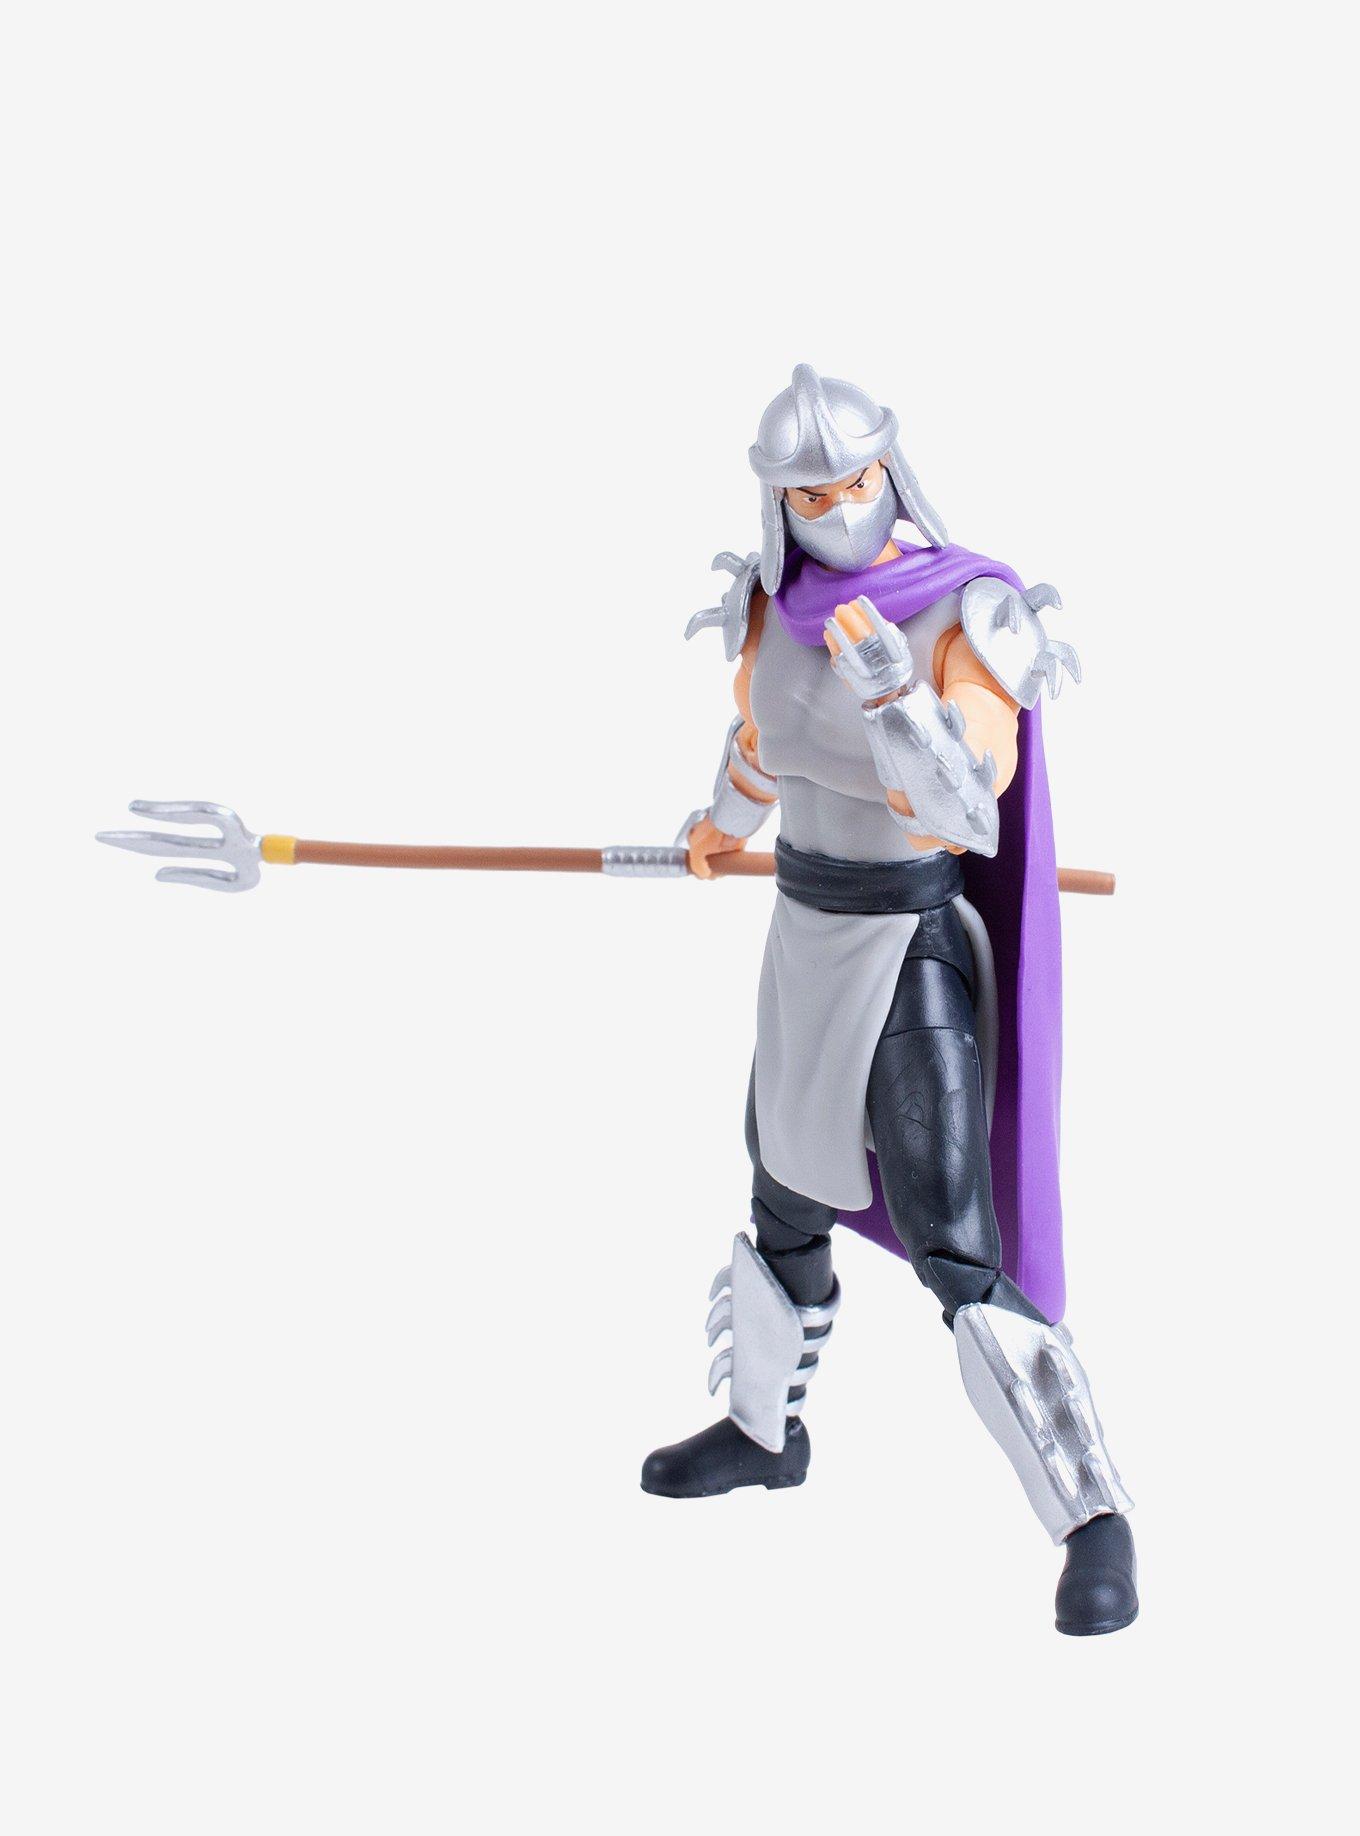 You may call me the Shredder A kitchen utensil? : r/TMNT